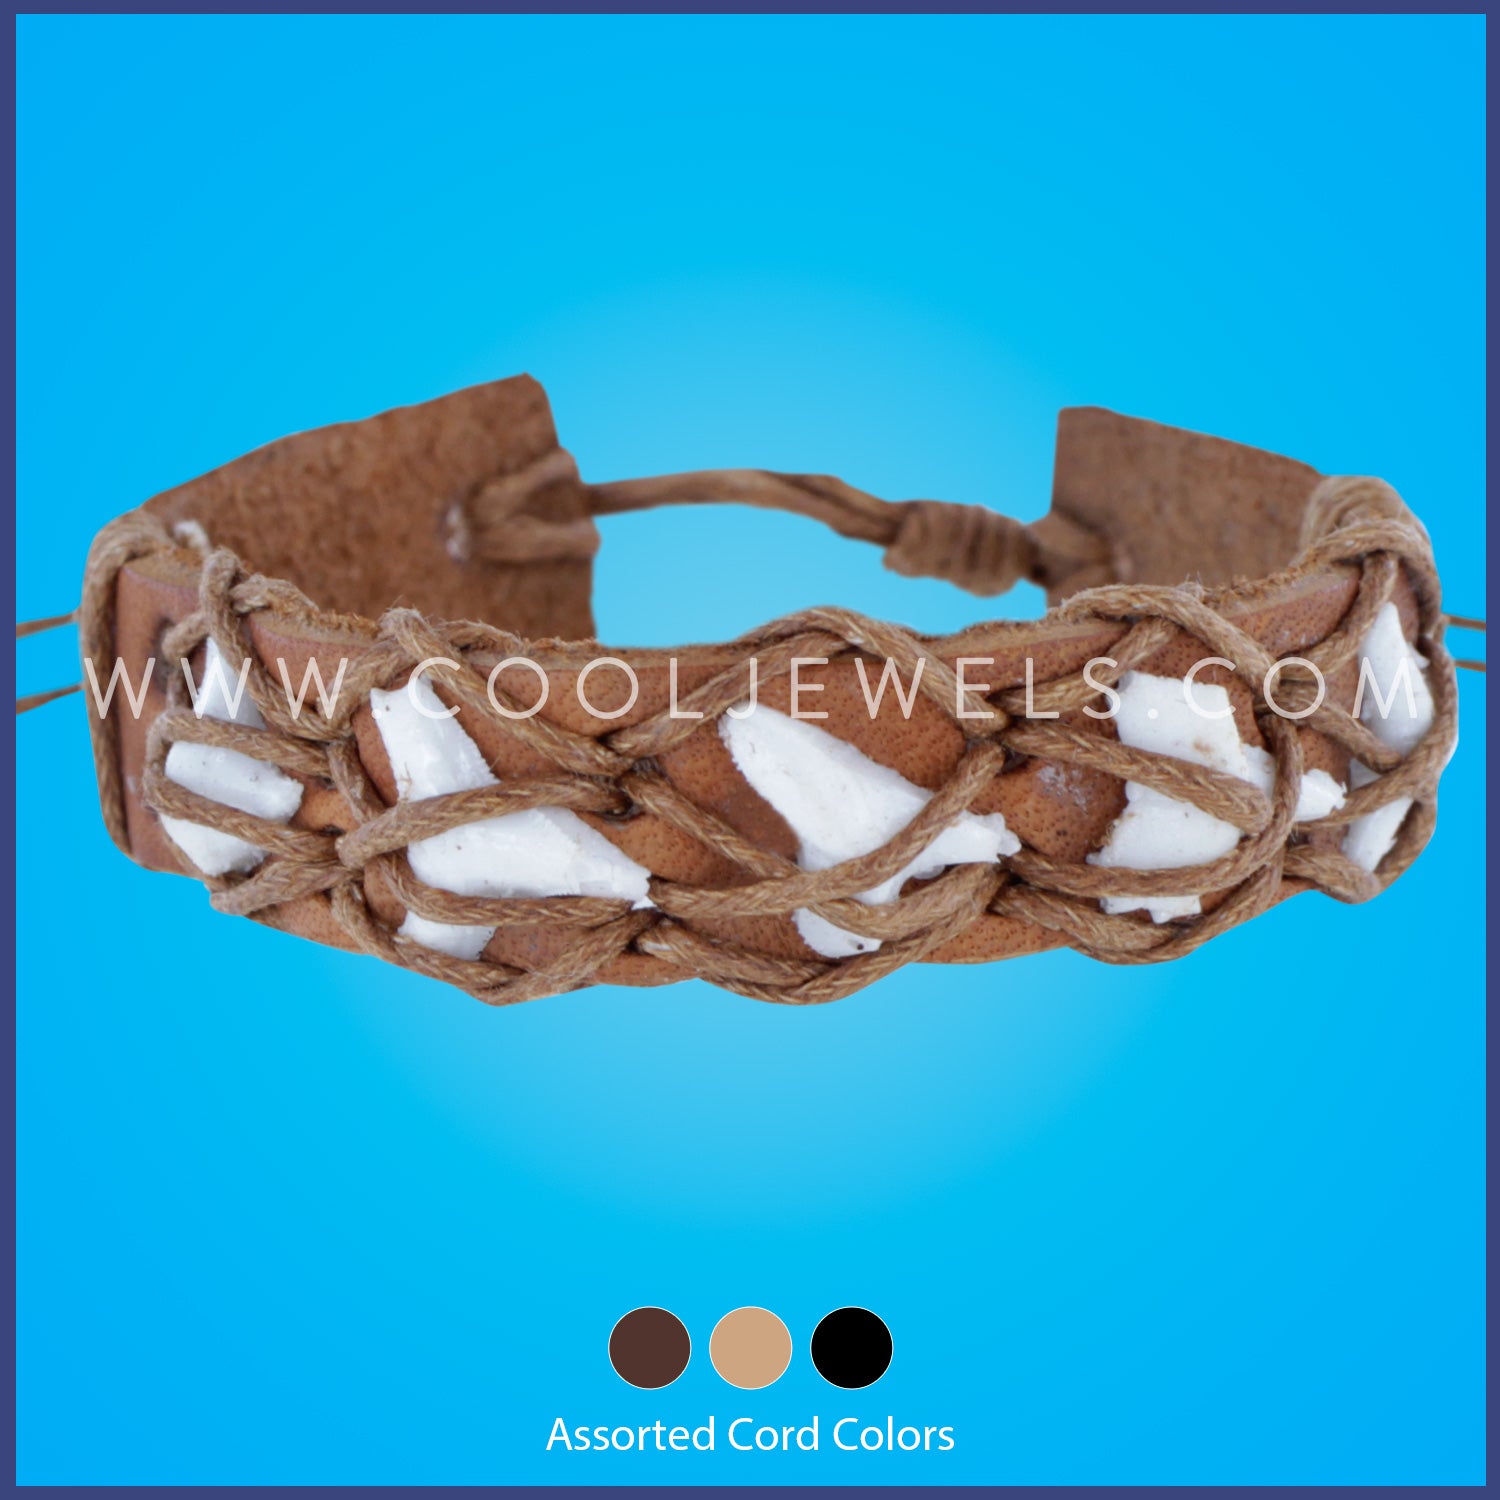 LEATHER SLIDER BRACELET WITH IMITATION SHARK TEETH AND 'X' DESIGN - ASSORTED COLORS